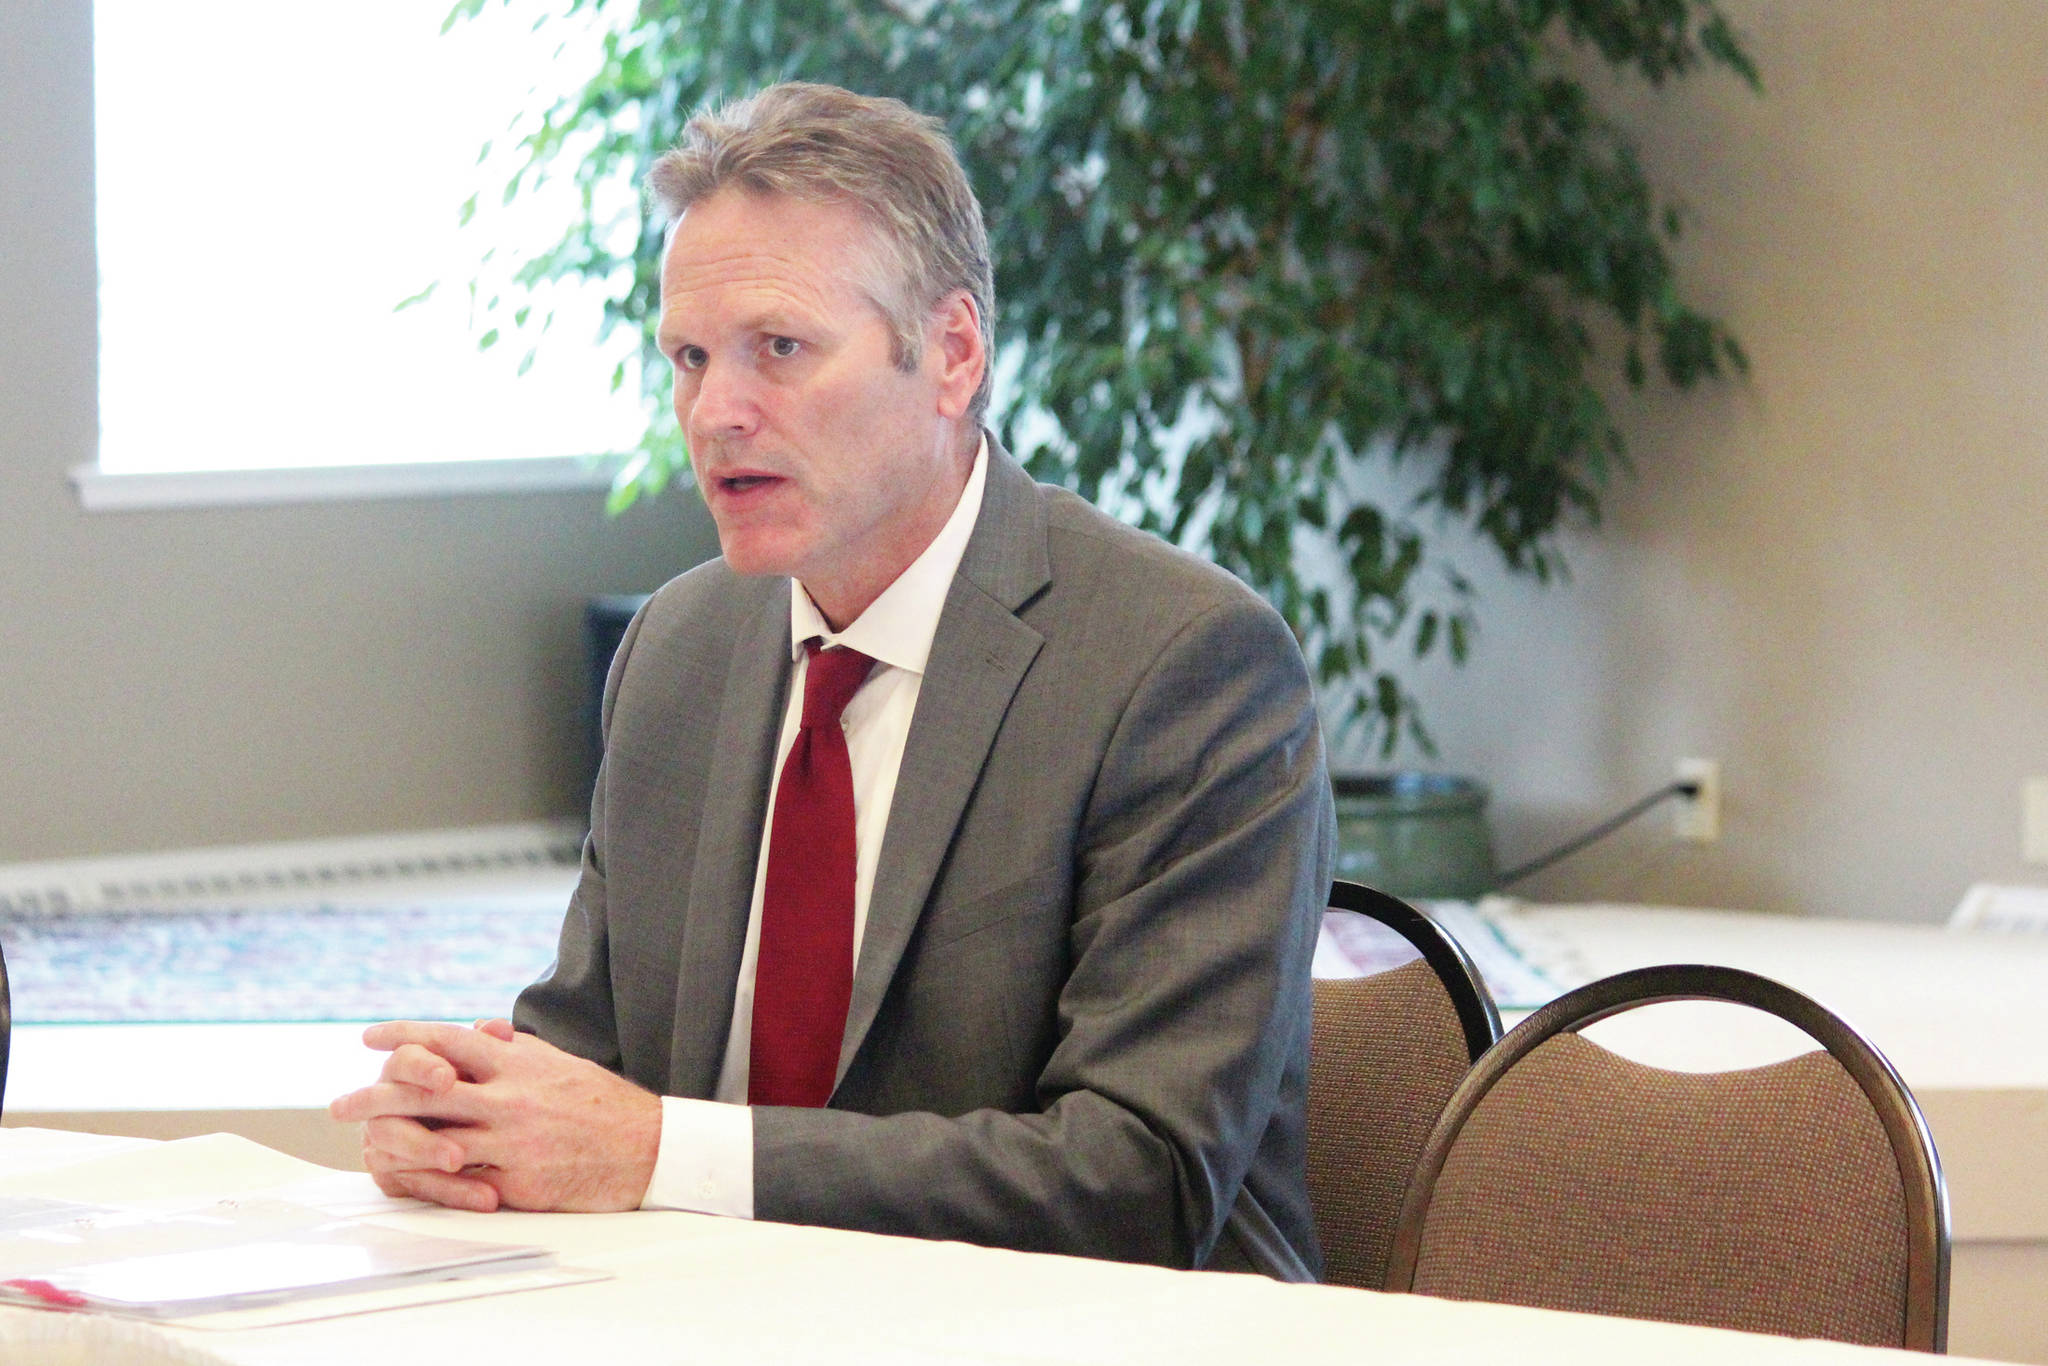 Gov. Mike Dunleavy speaks to attendees of a conference held by the Alaska State Home Building Association and the Kenai Peninsula Home Builders Association on Thursday, Oct. 17, 2019 at Land’s End Resort in Homer, Alaska. Dunleavy came to brief conference participants on the statewide economy. (Photo by Megan Pacer/Homer News)